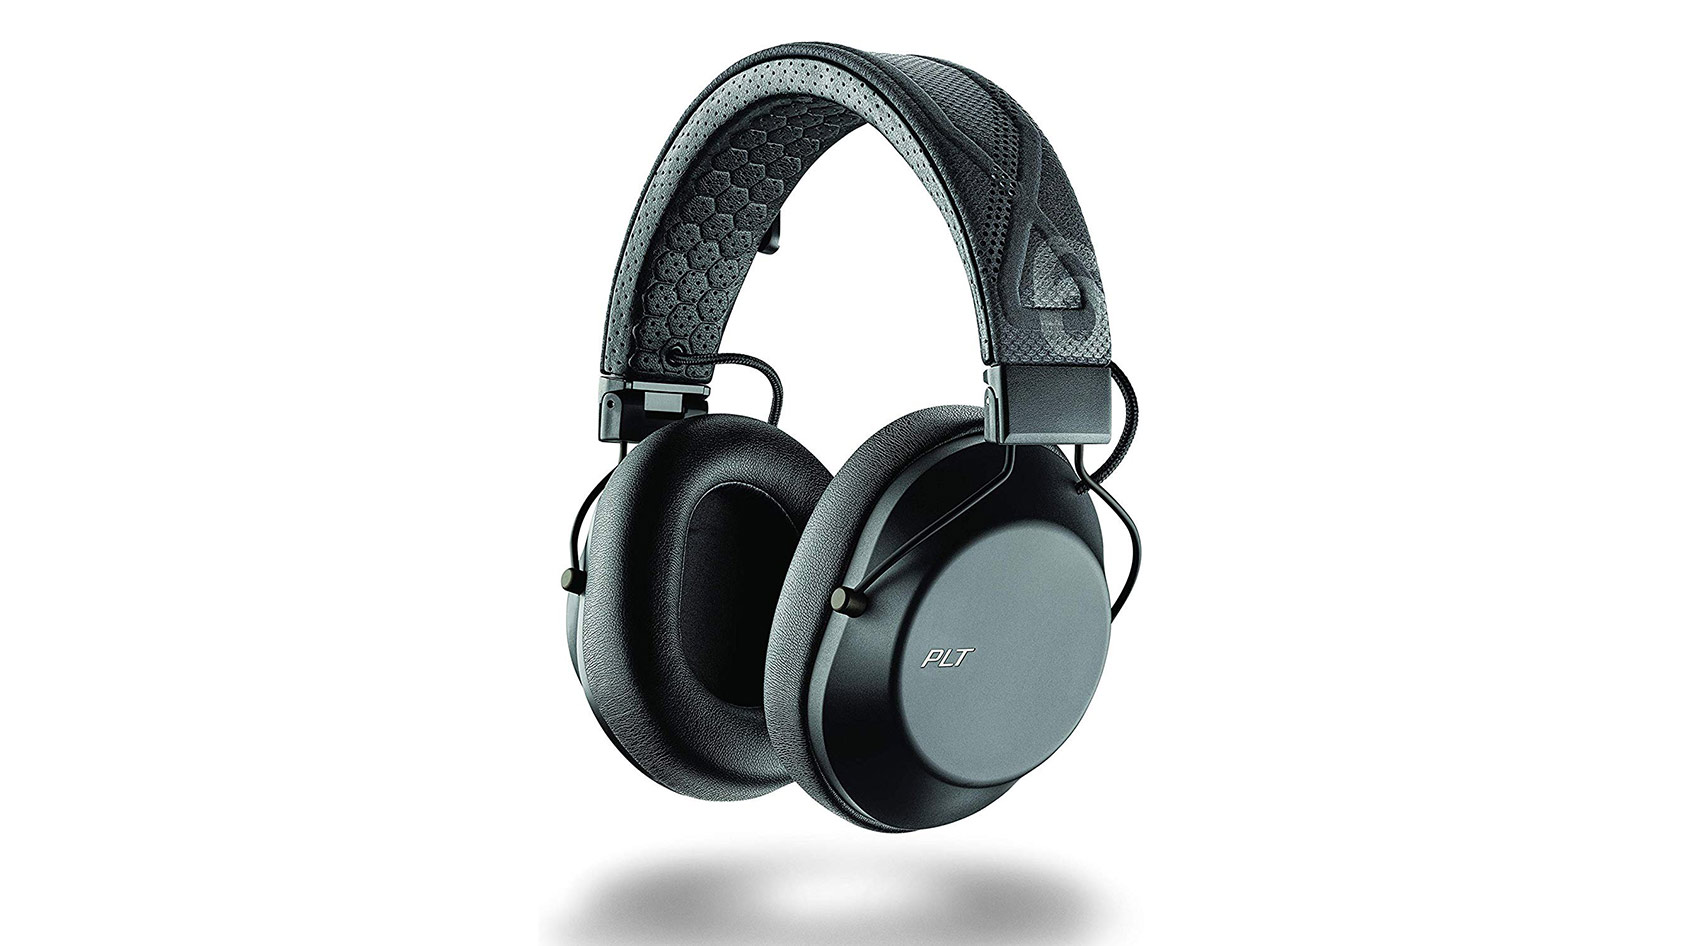 The Plantronics BackBeat Fit 6100 in black against a white background.